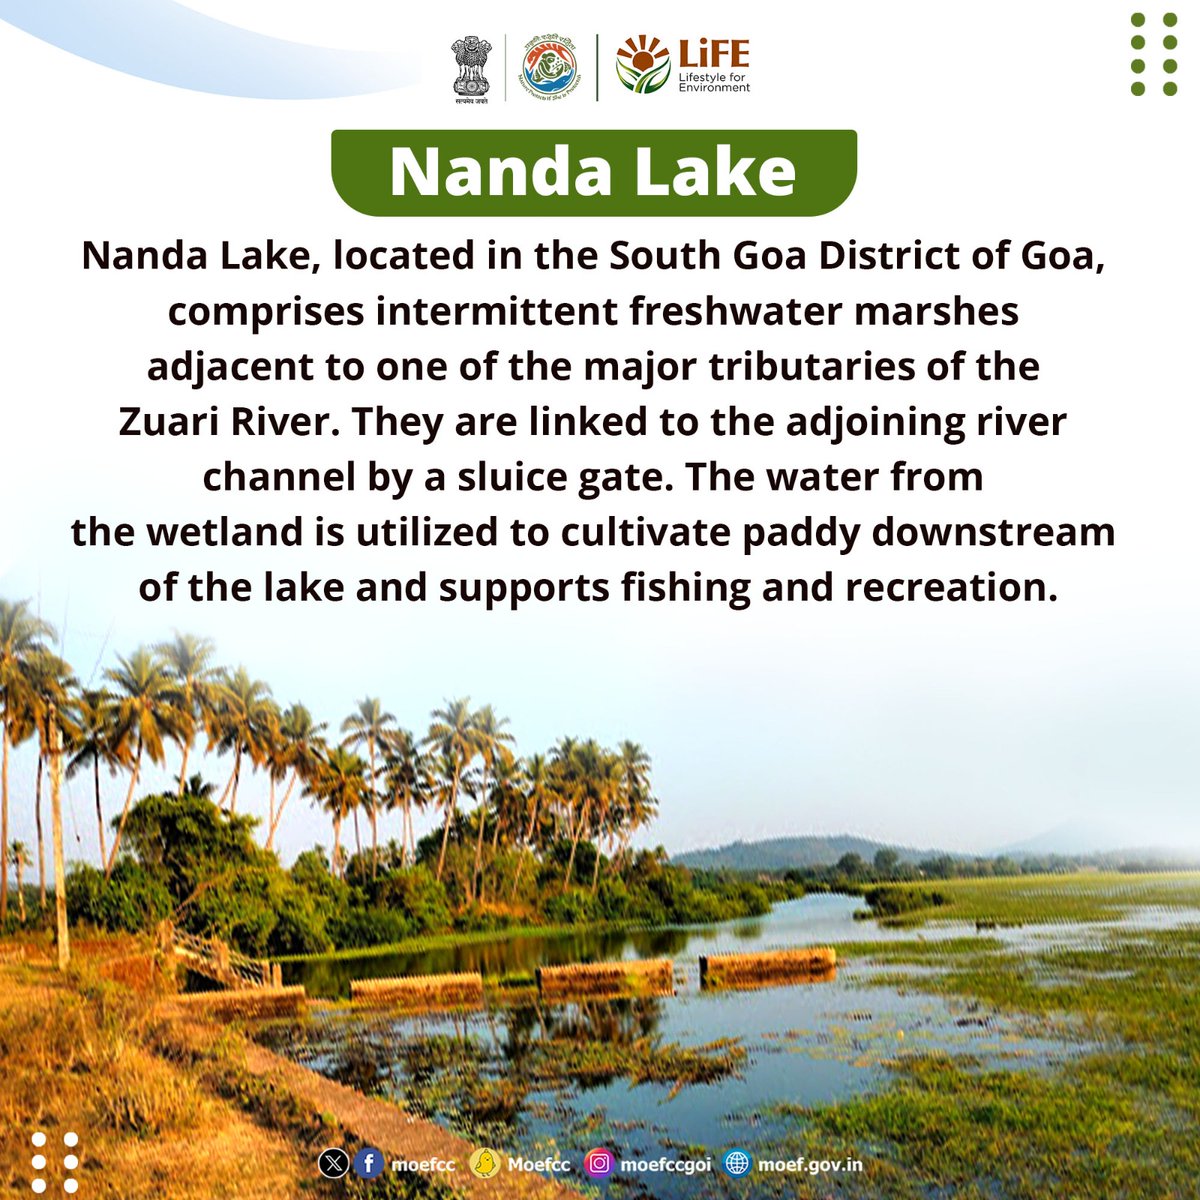 Discovering India's Ramsar Sites

Day 79: Nanda Lake

From wetlands to wildlife, each site is a unique haven for nature. Let's celebrate and safeguard these vital ecosystems together!

#RamsarSites #MissionLiFE #ProPlanetPeople